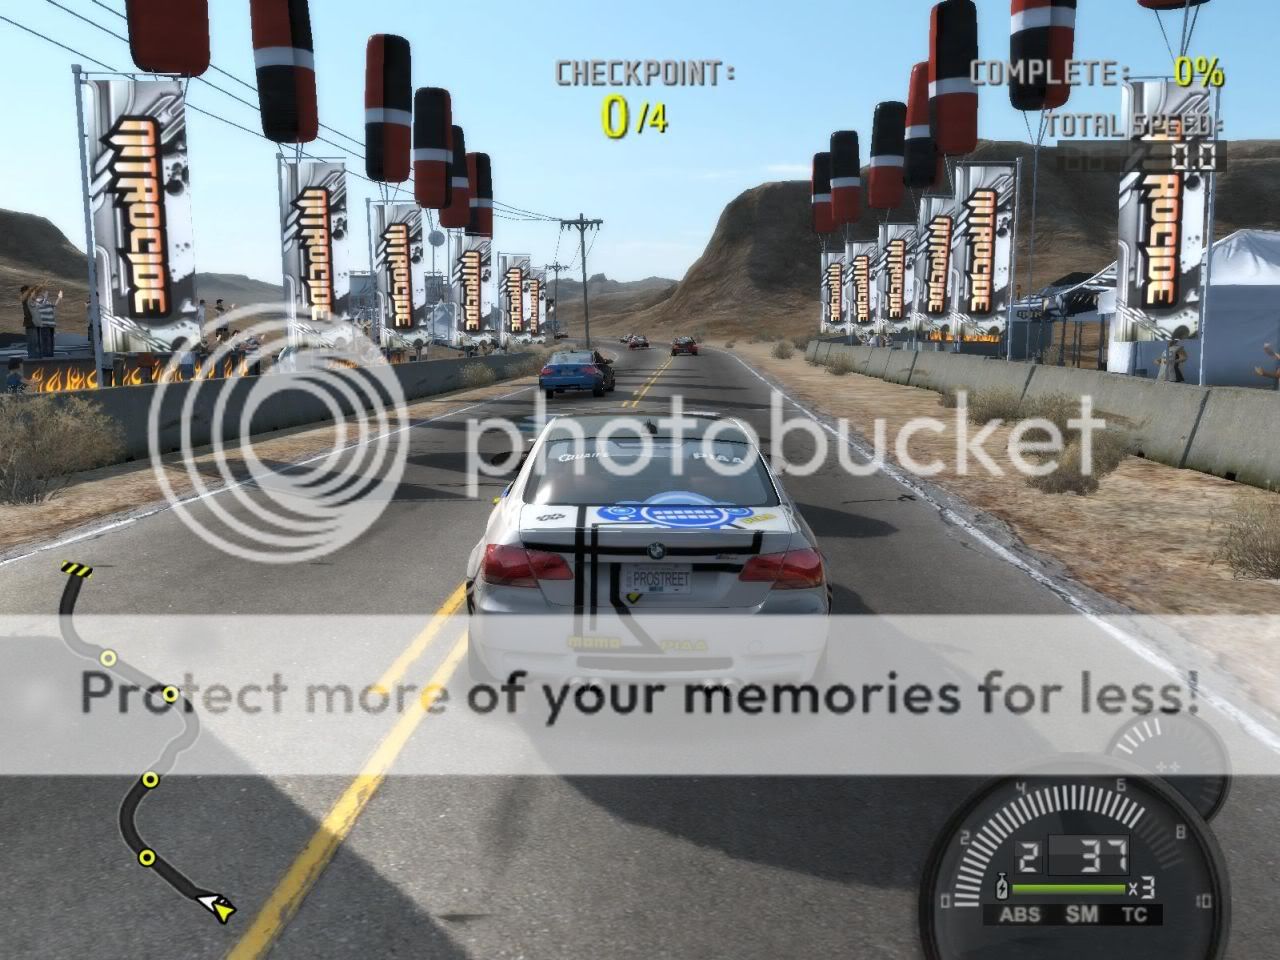 need for speed prostreet ost